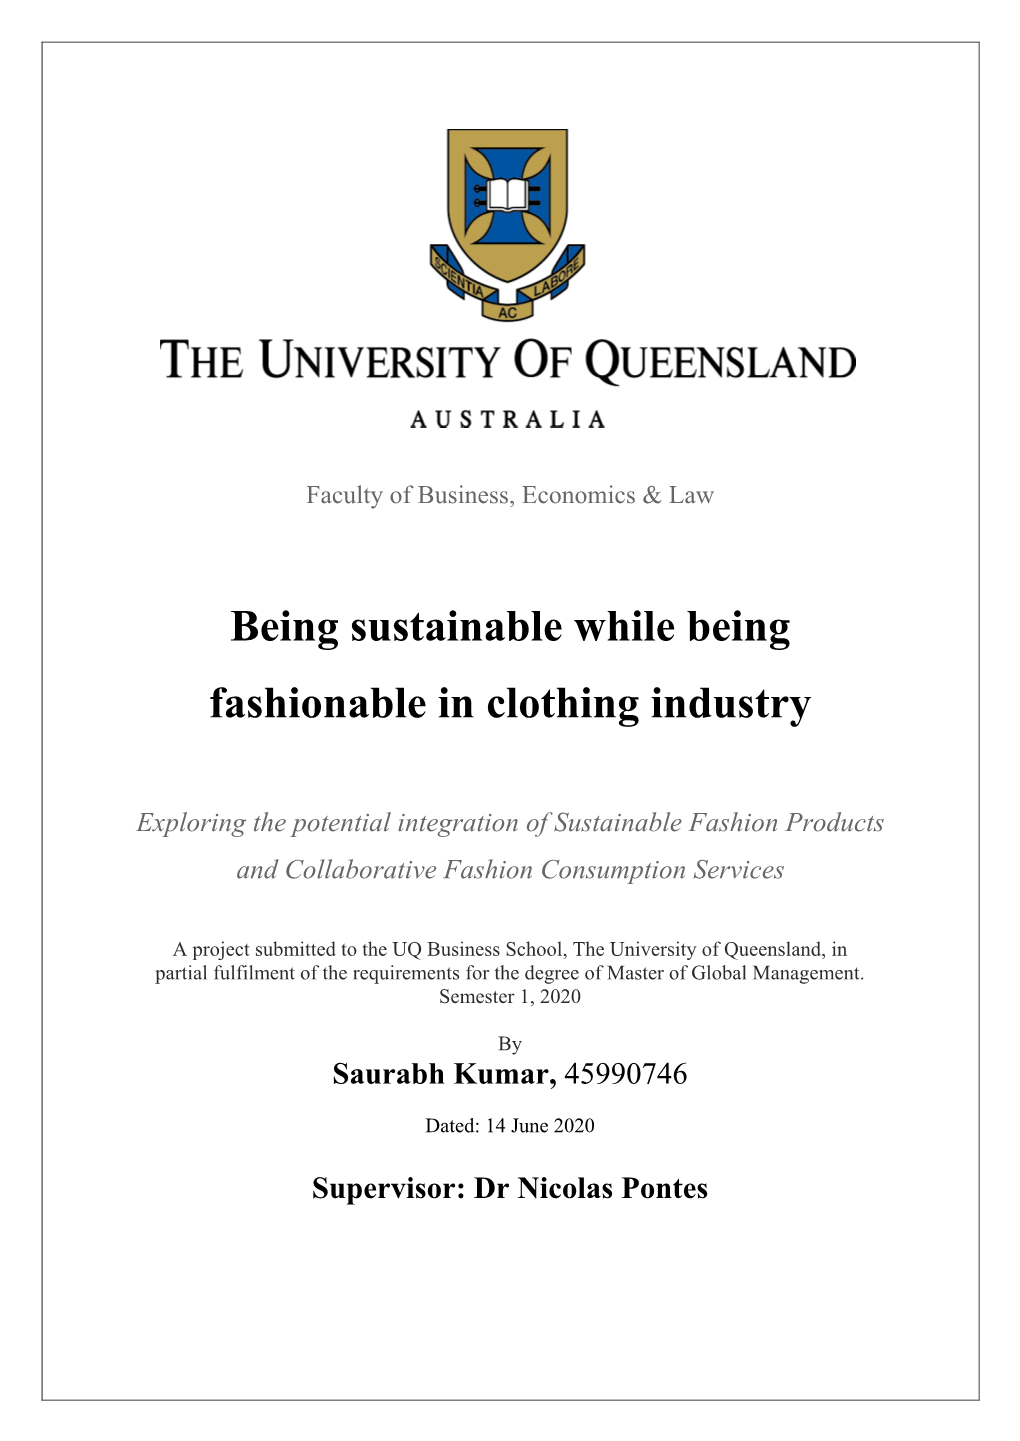 Being Sustainable While Being Fashionable in Clothing Industry